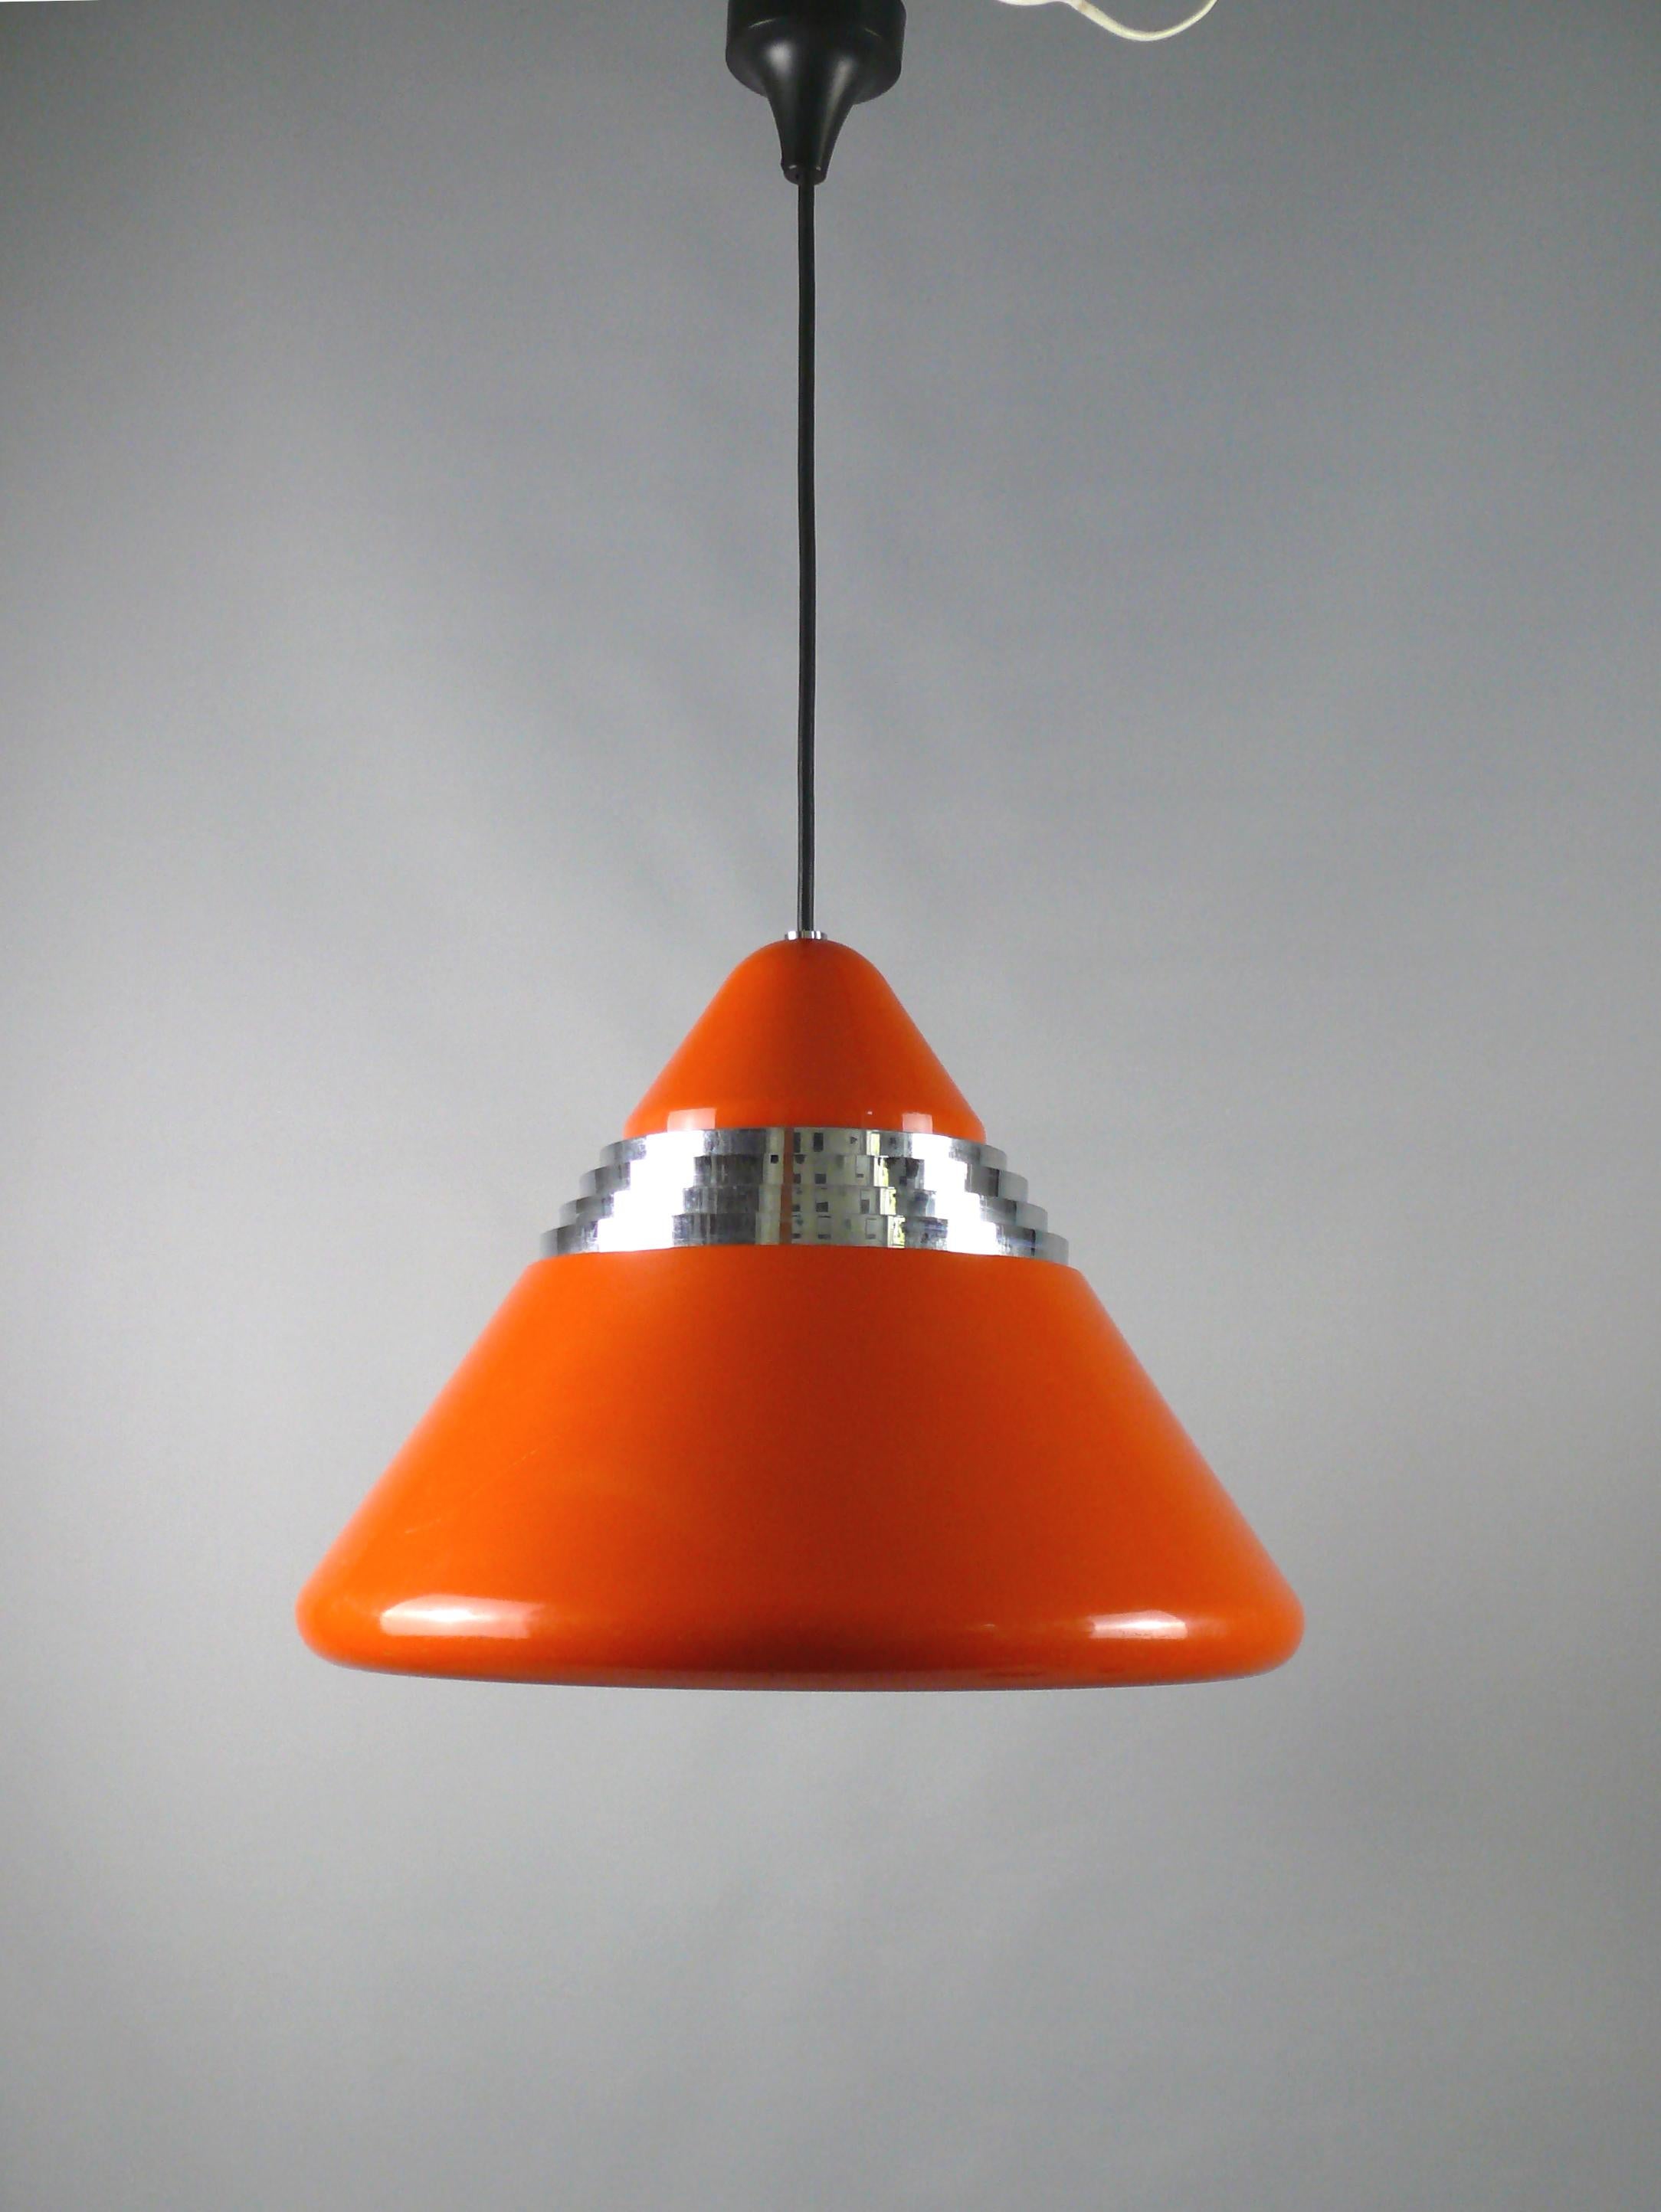 Pendant lamp with red painted screen, Staff Germany model 5535/36 - design Alfred Kalthoff, probably manufactured in 1967.

Rare design classic from the 1960s in a design typical of the time with a conical shade, rounded edges and chrome ventilation